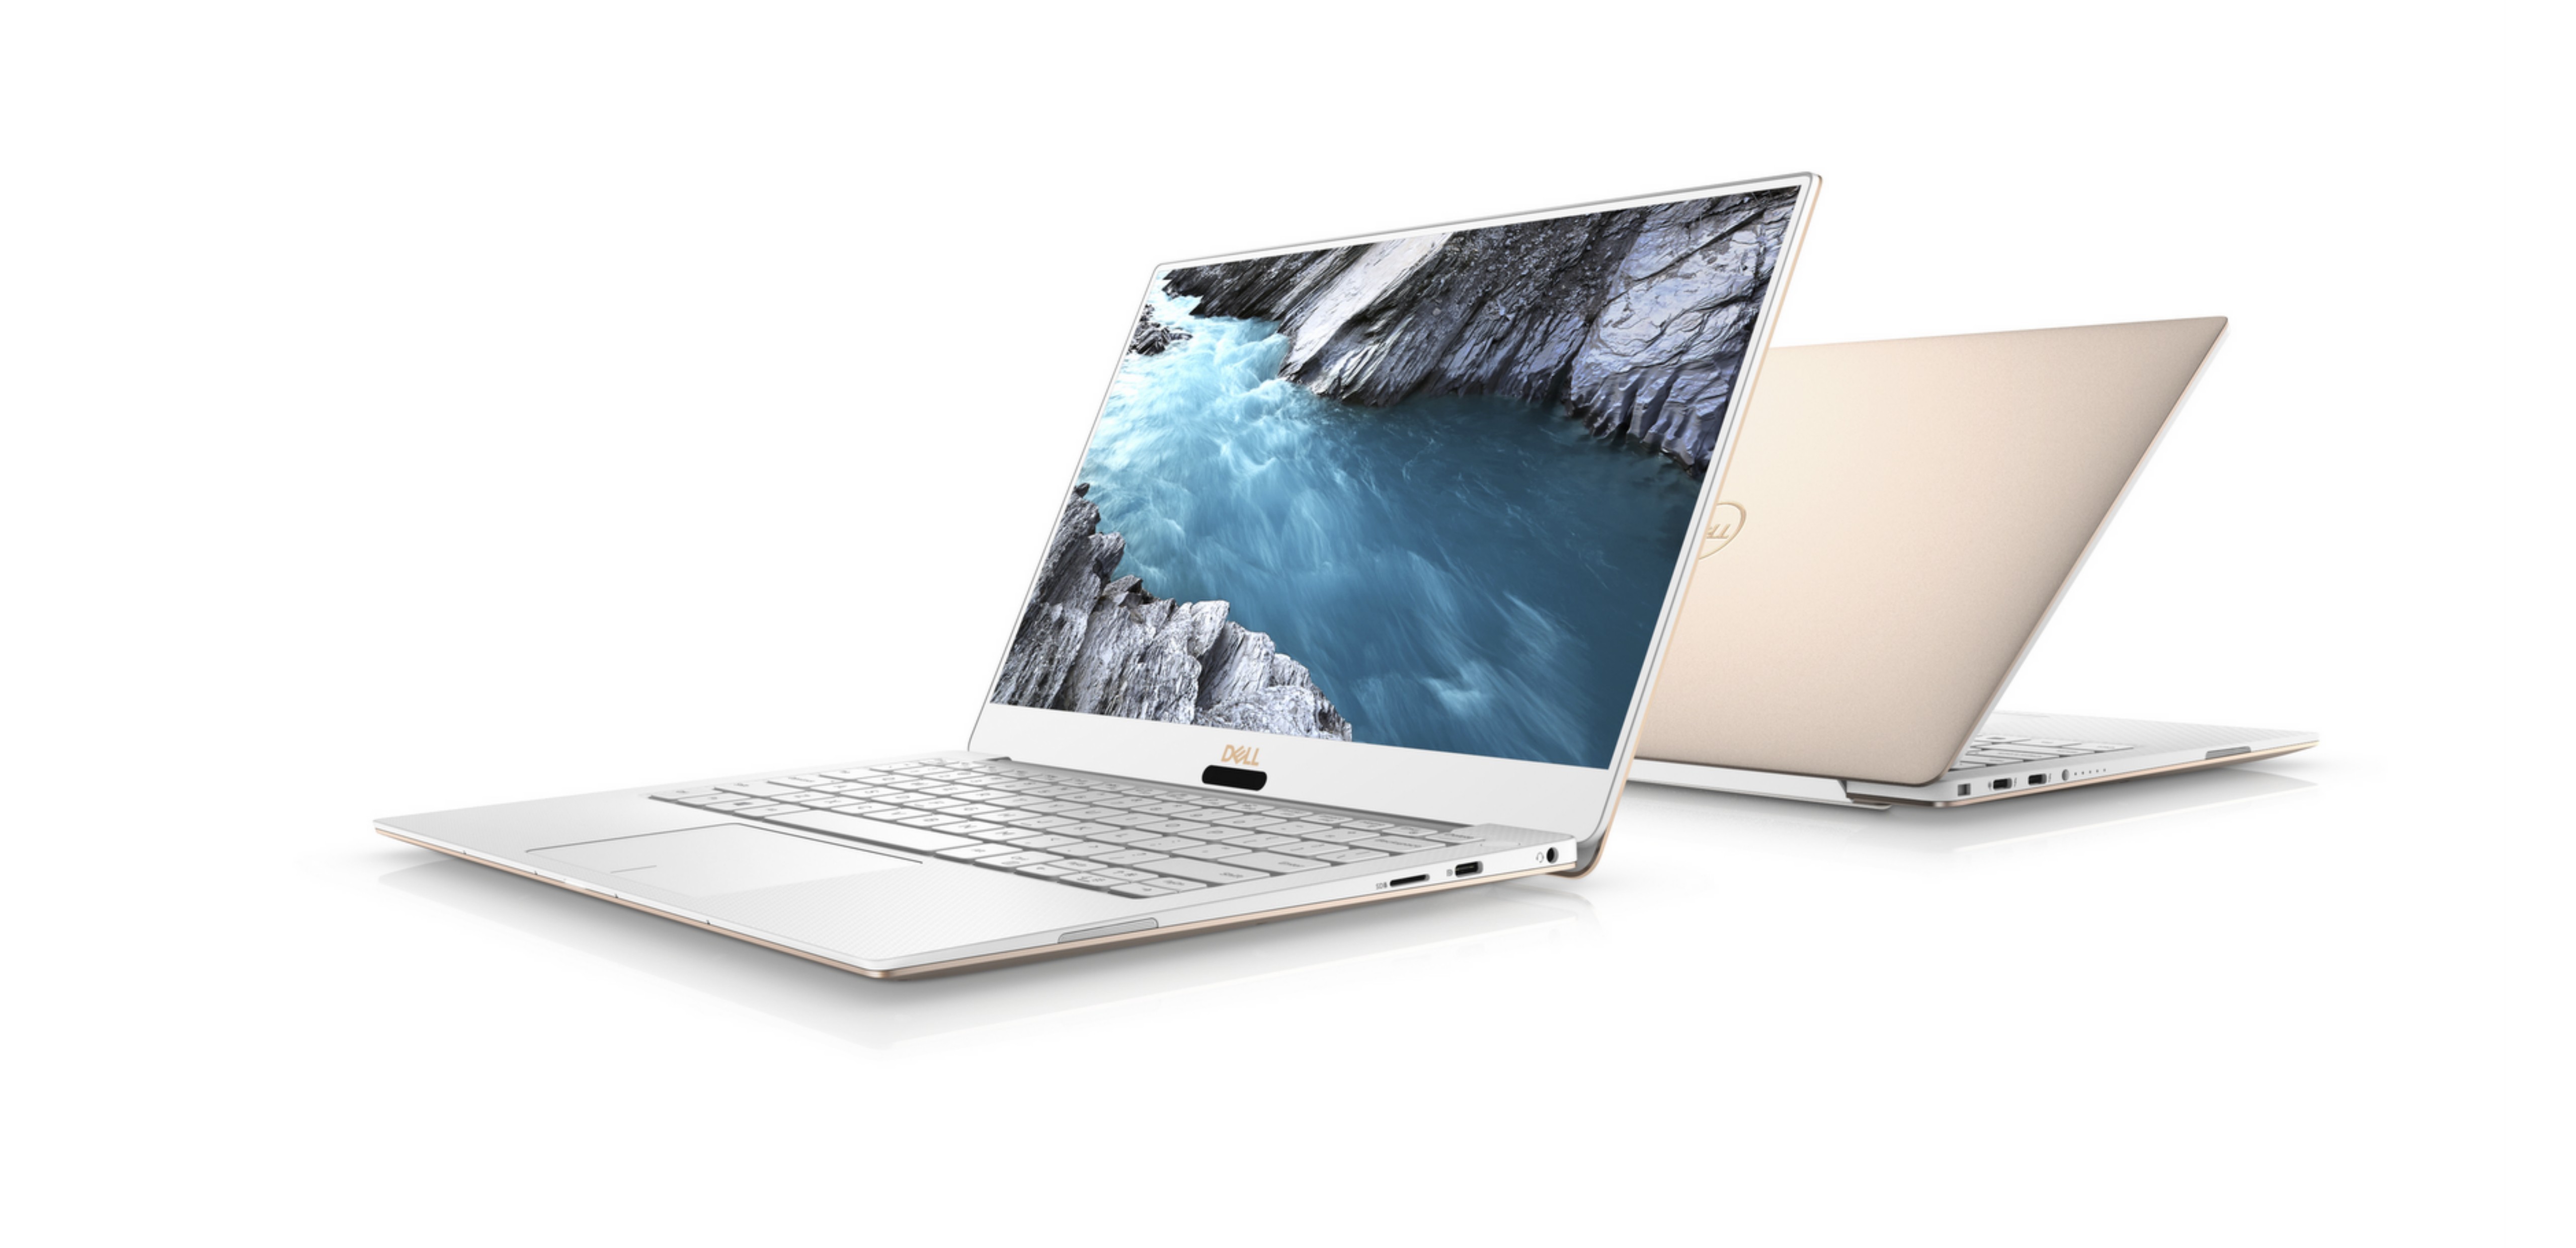 Product shot of two Dell XPS PCs sitting back to back on a white background